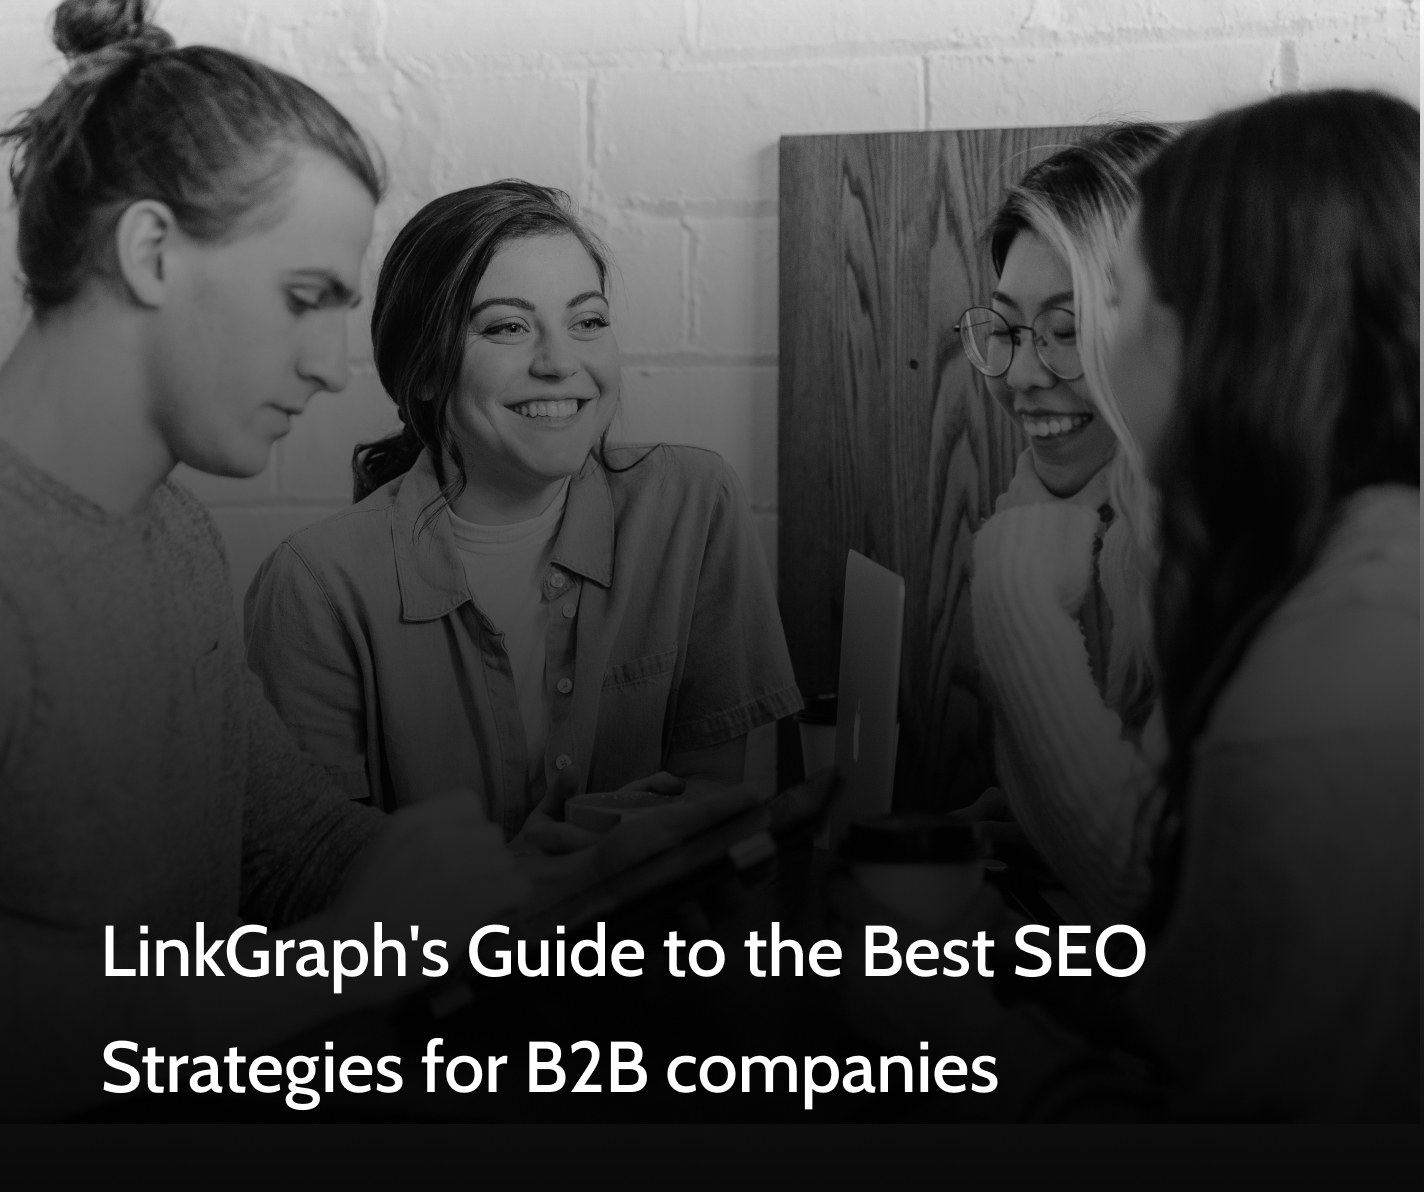 LinkGraph's Guide to the Best SEO Strategies for B2B companies in text with a group of people sitting around a conference table